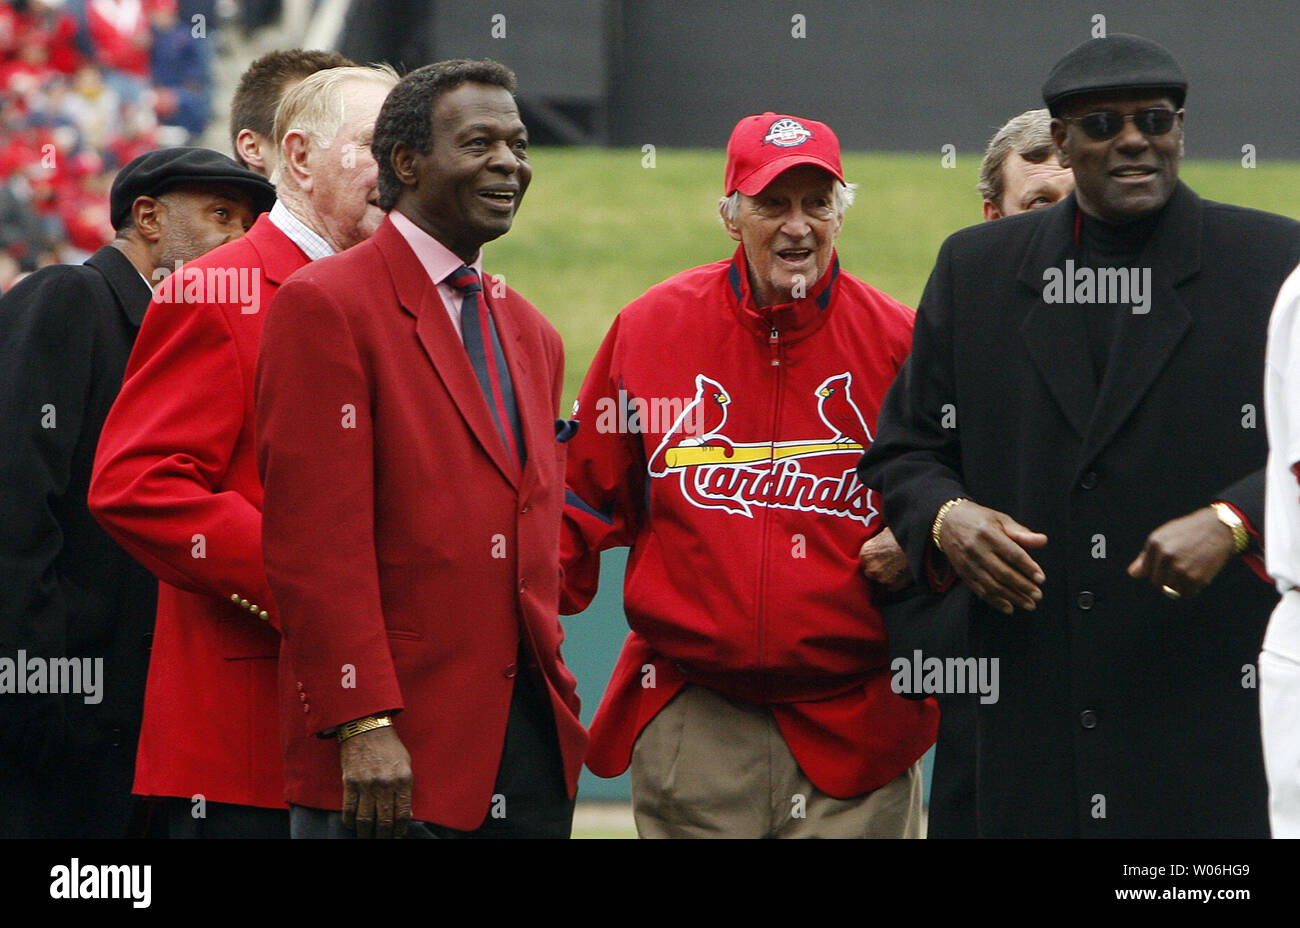 St. Louis Cardinals - Hall of Famers Bruce Sutter, Bob Gibson, Red  Schoendienst, Whitey Herzog, Stan Musial, Lou Brock, and Ozzie Smith pose  during the 2012 Opening Day ceremony.